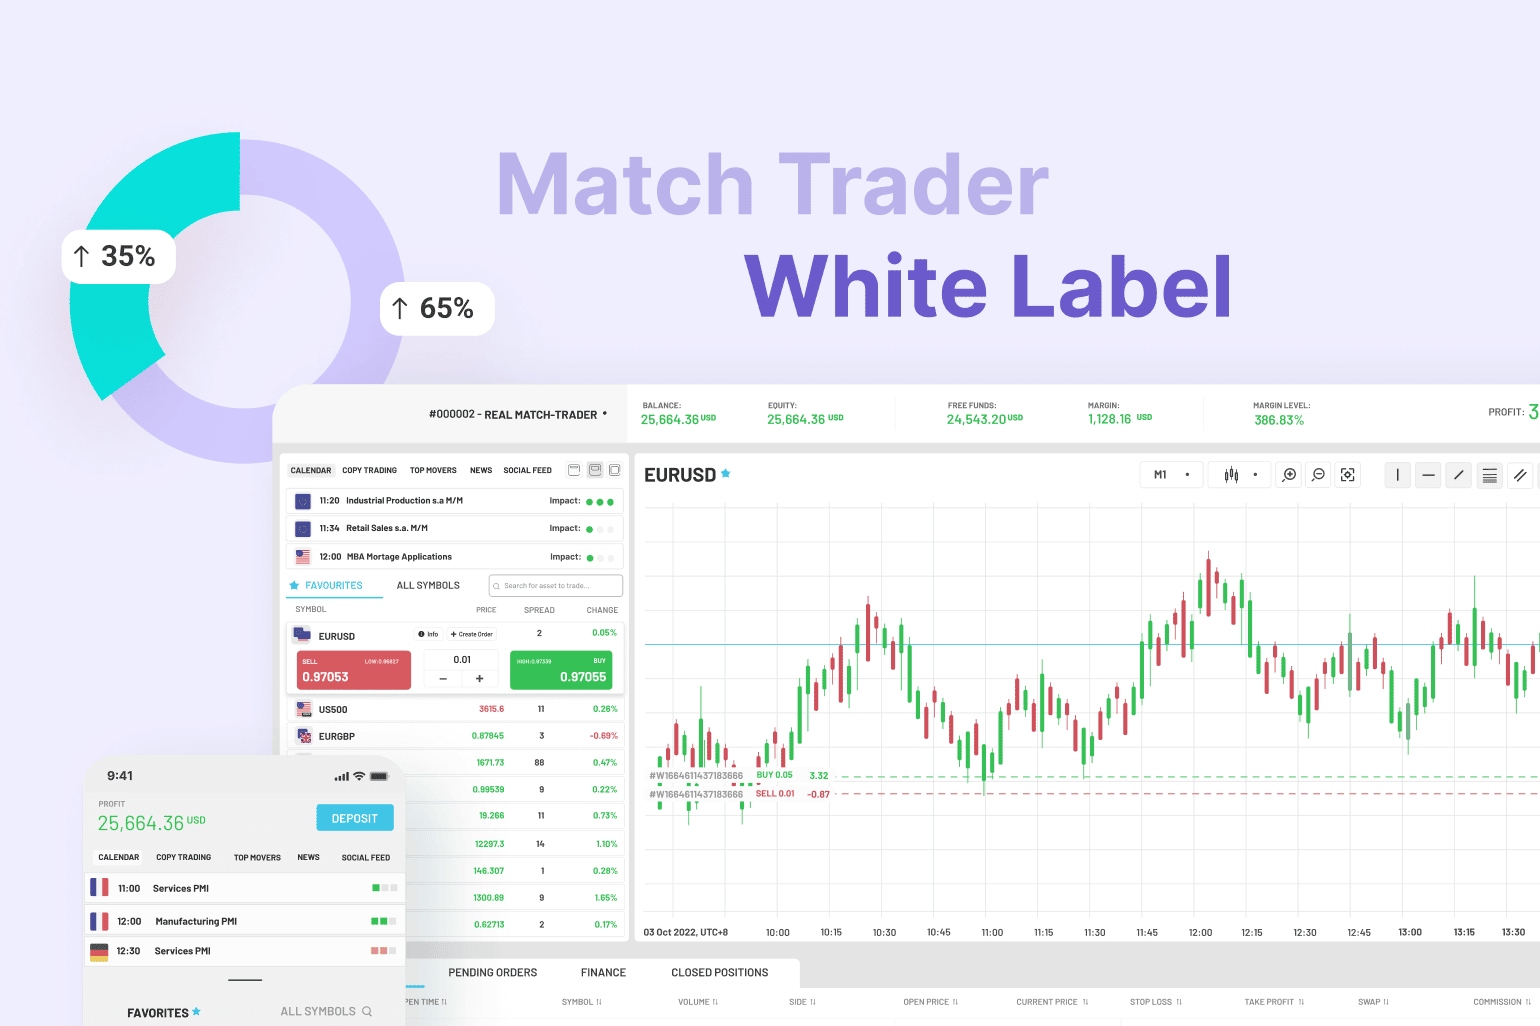 By Integrating with Match Trader, B2Broker Broadens Its Selection of White Label Liquidity Offering